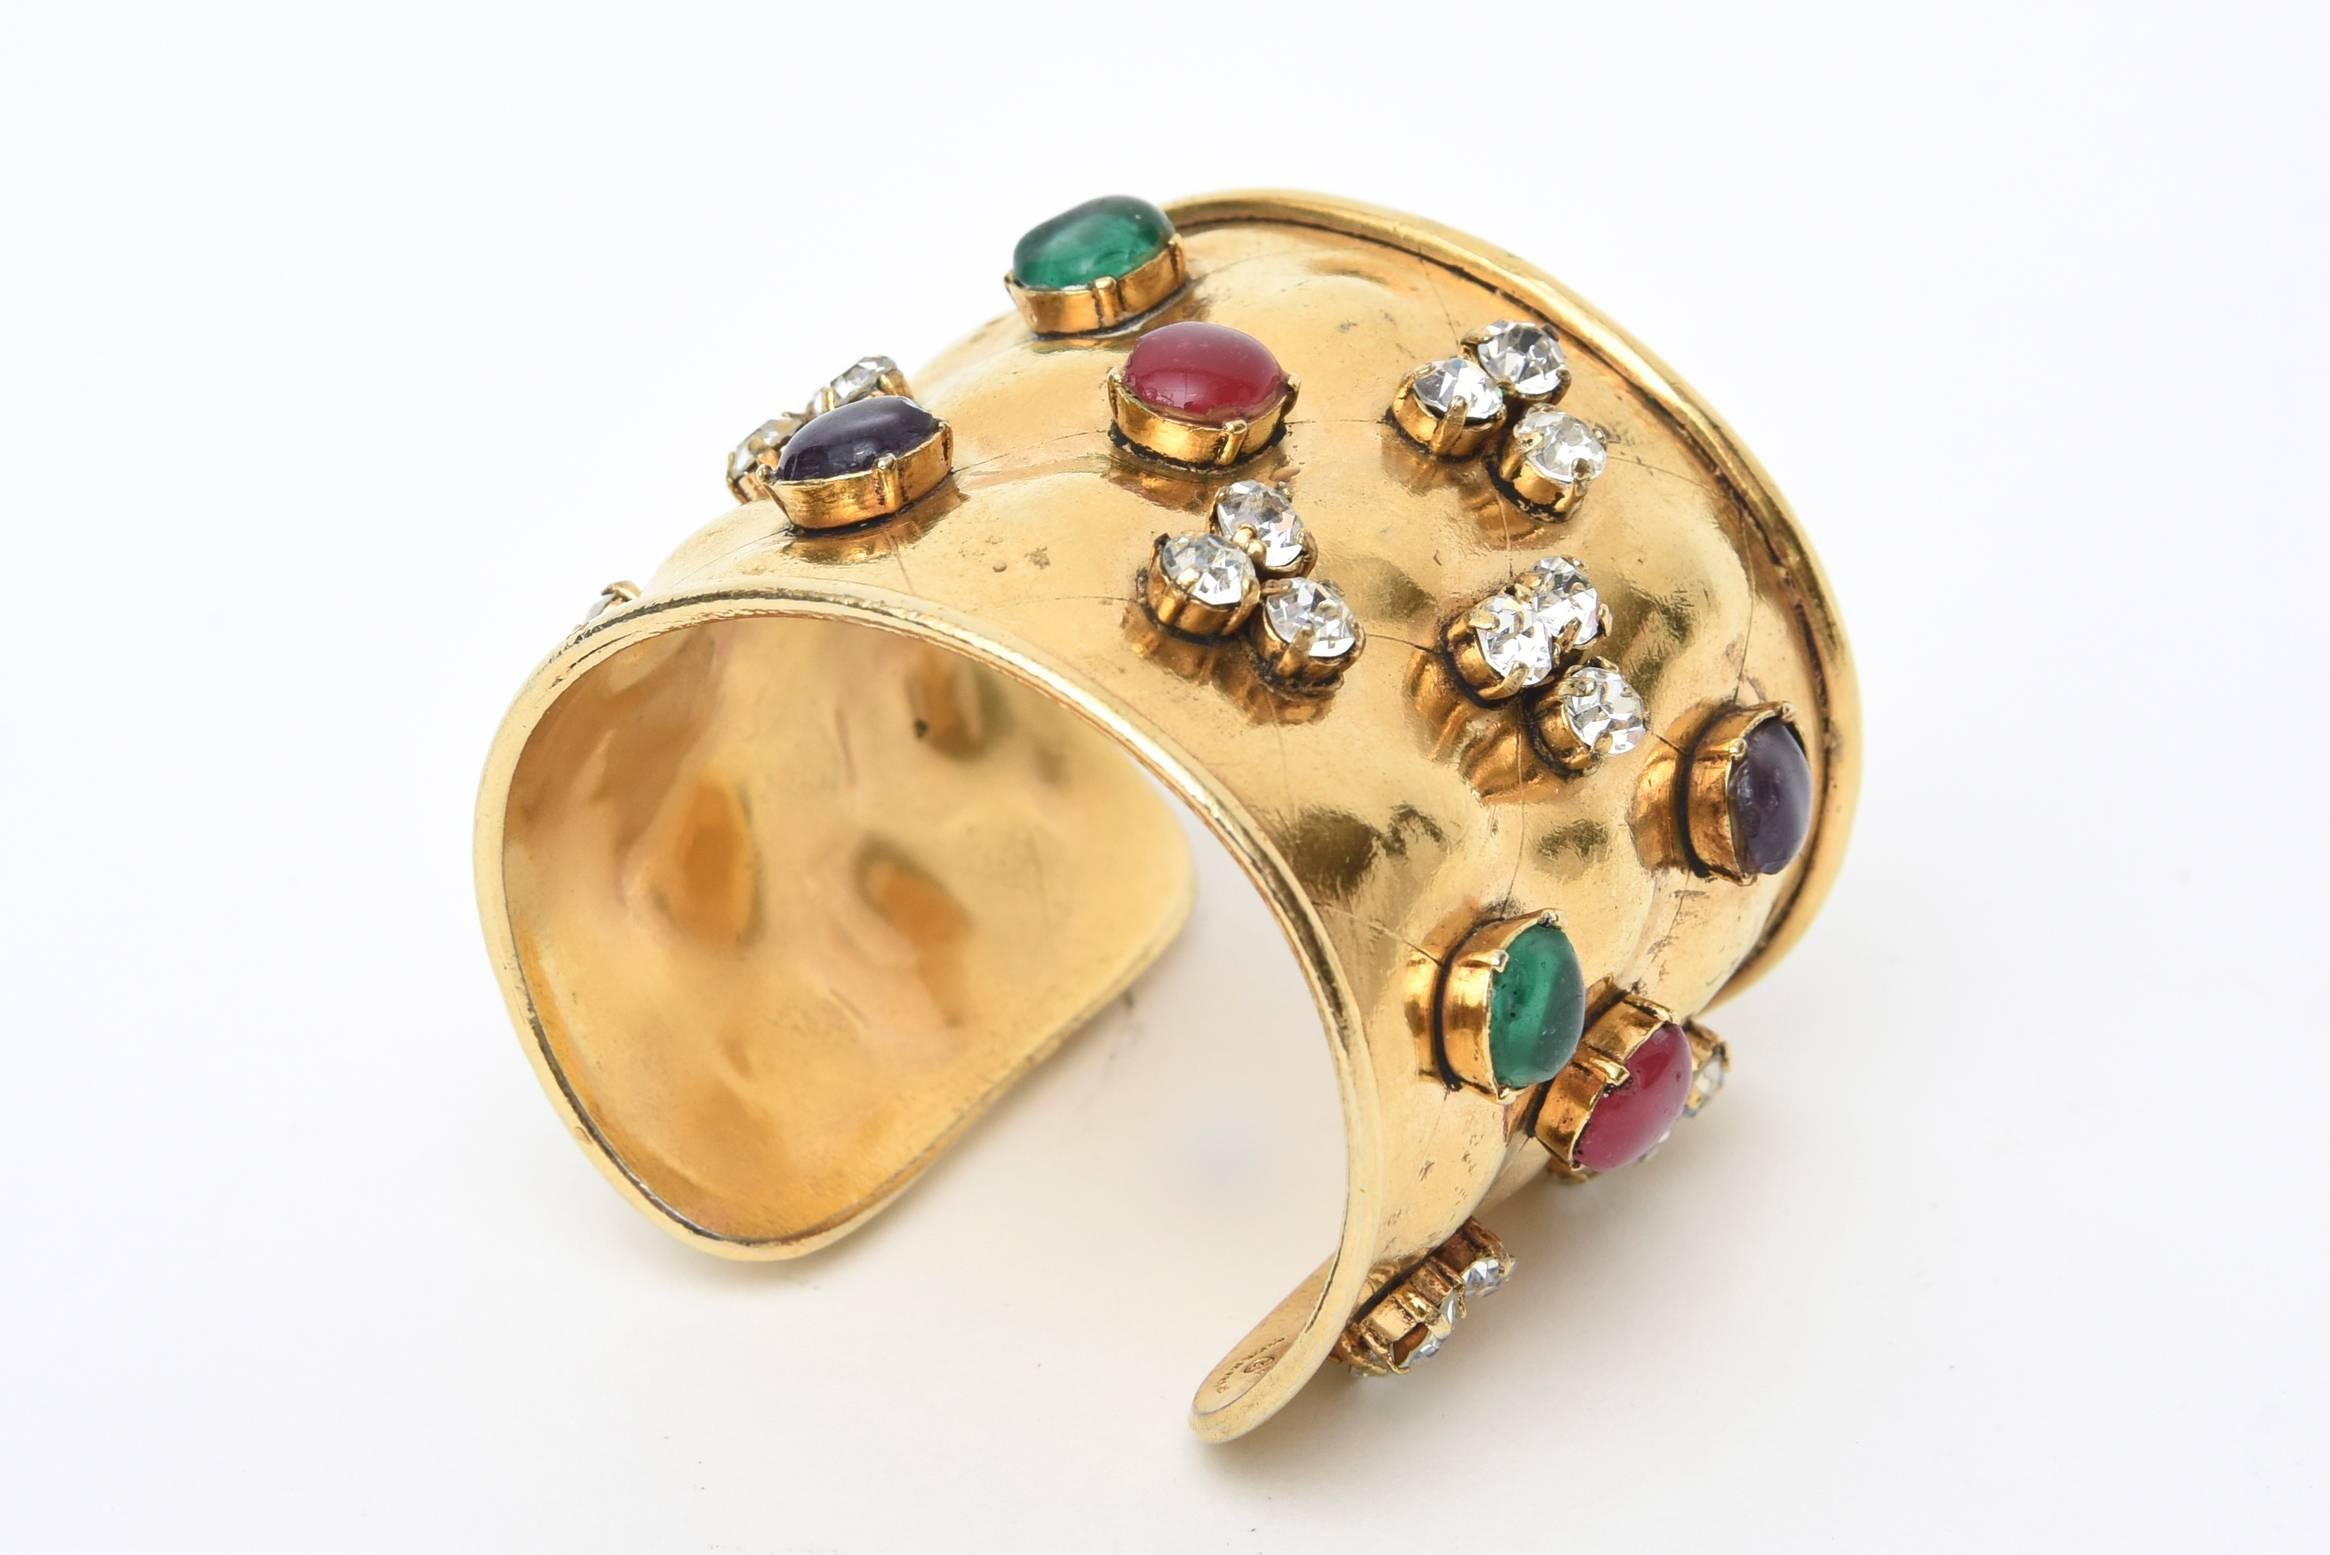 This stunning cuff bracelet by Chanel is signed  channel cc made in france.
It has gorgeous poured glass; which is the gripoux technique and different rhinestones set in cabochon form. On the top, it has a criss cross diamond shaped design in the